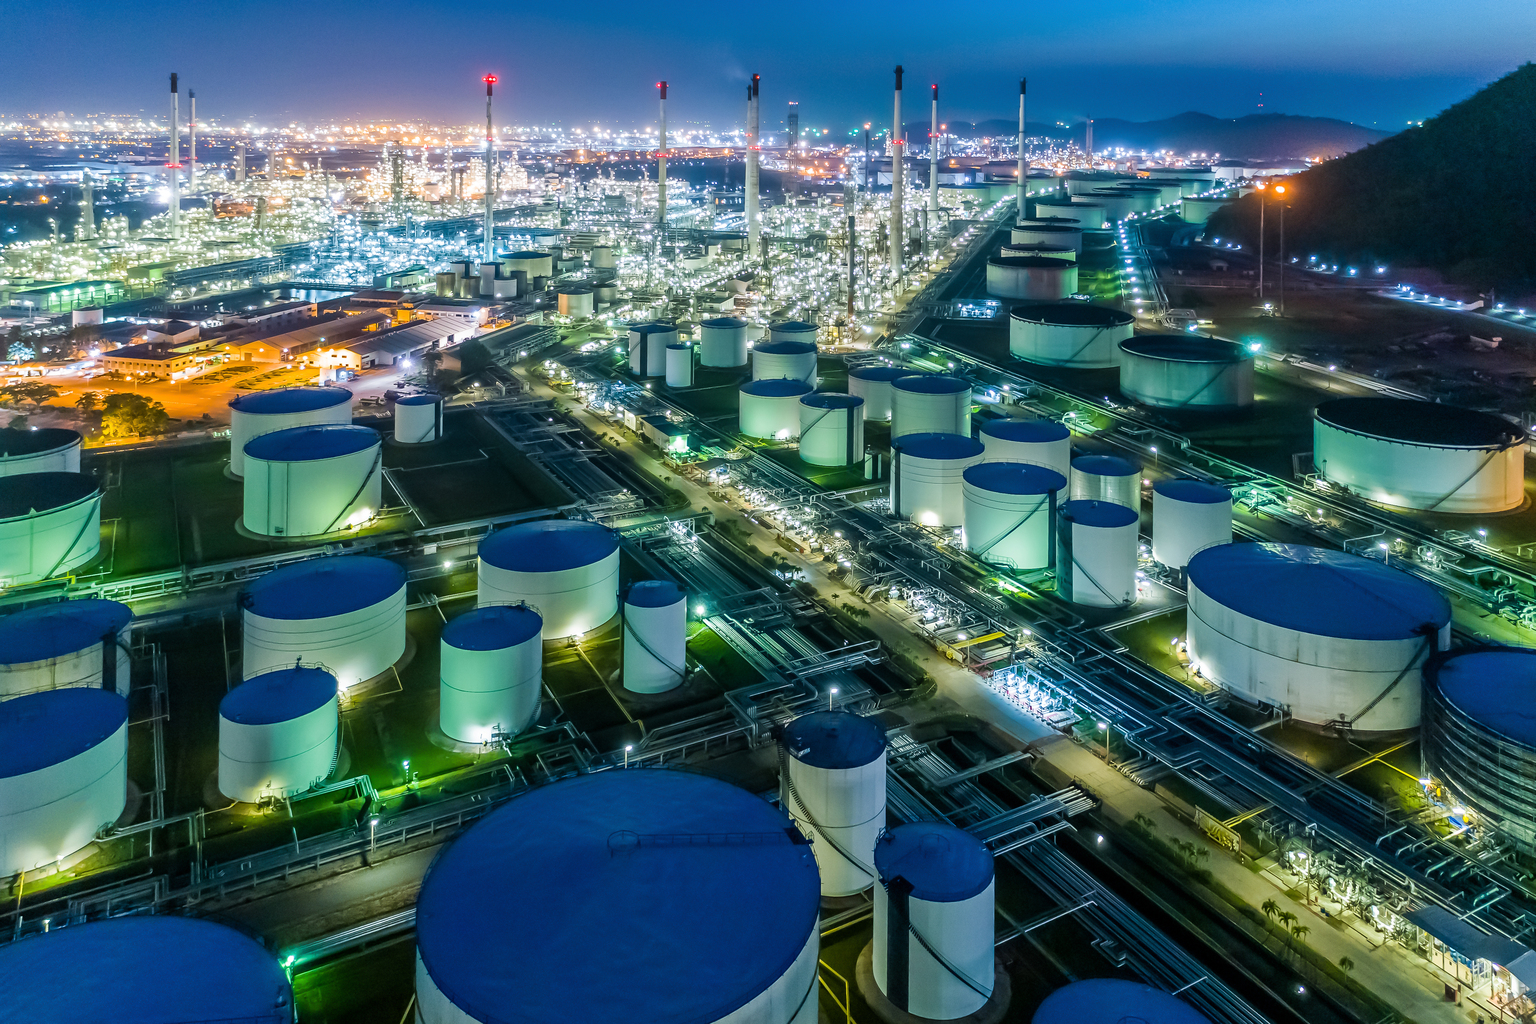 Aerial top view Oil refinery factory at night for energy or gas industry background